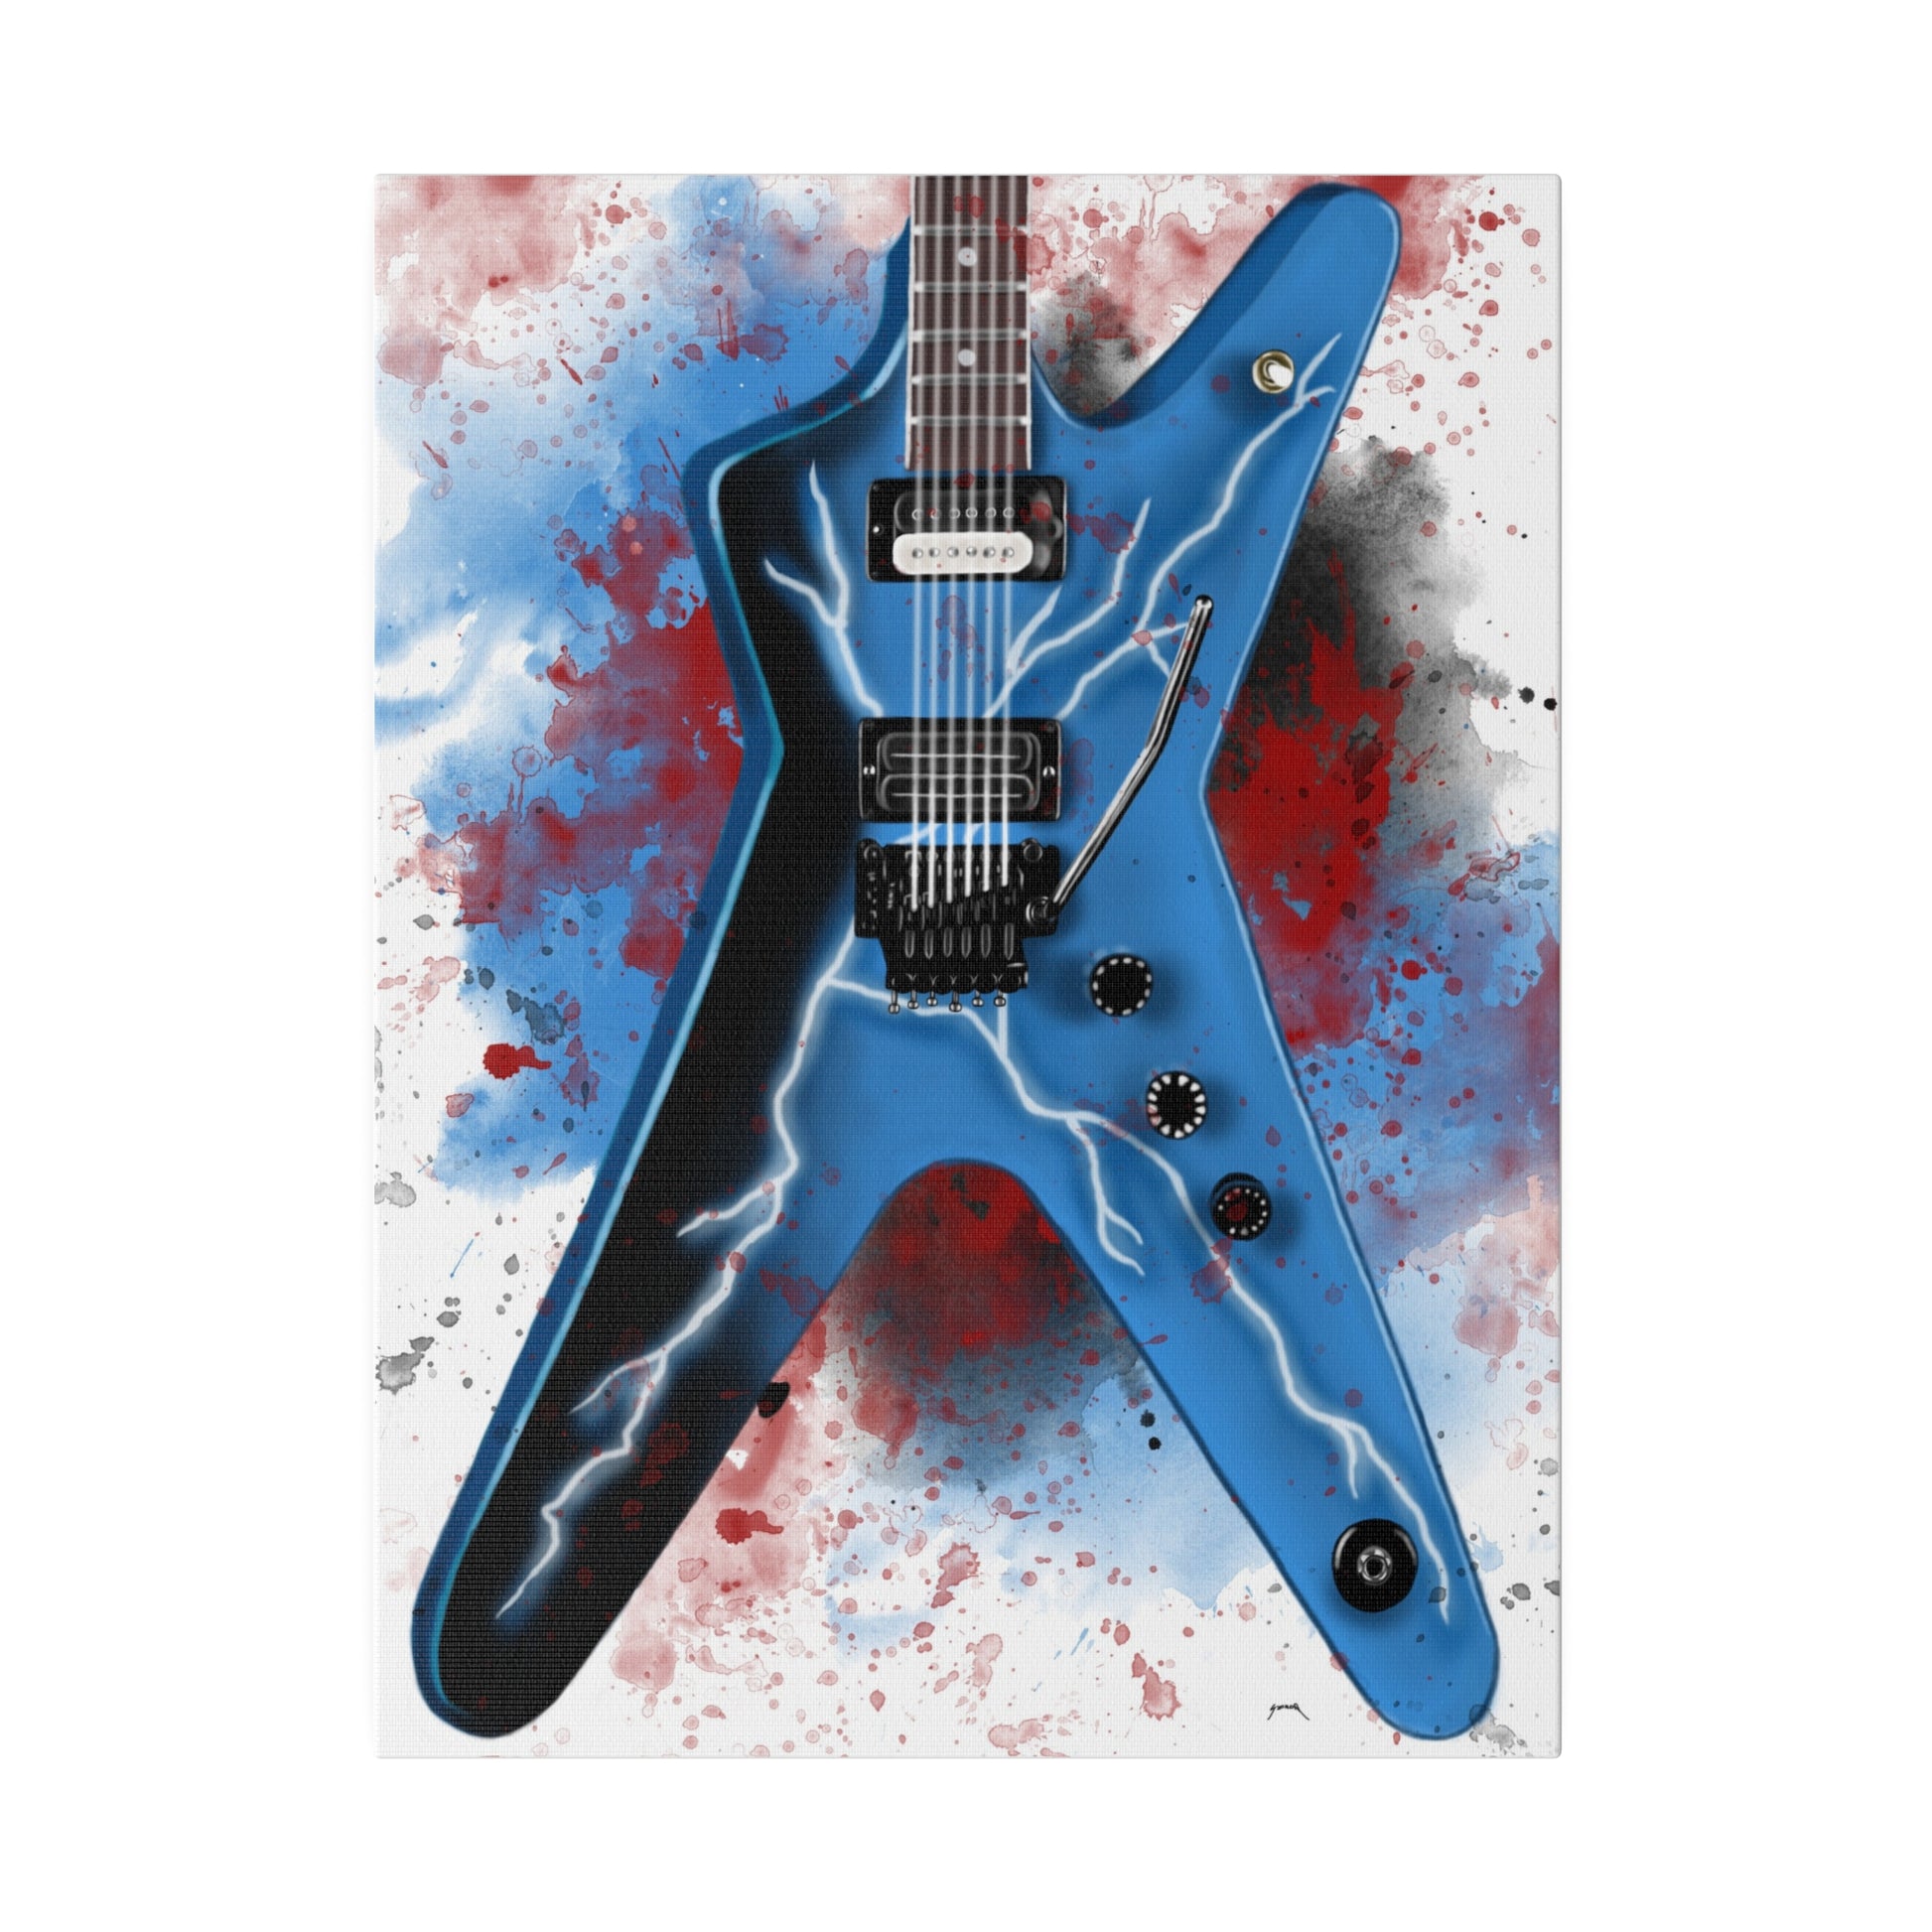 Digital painting of Dime's electric guitar printed on canvas